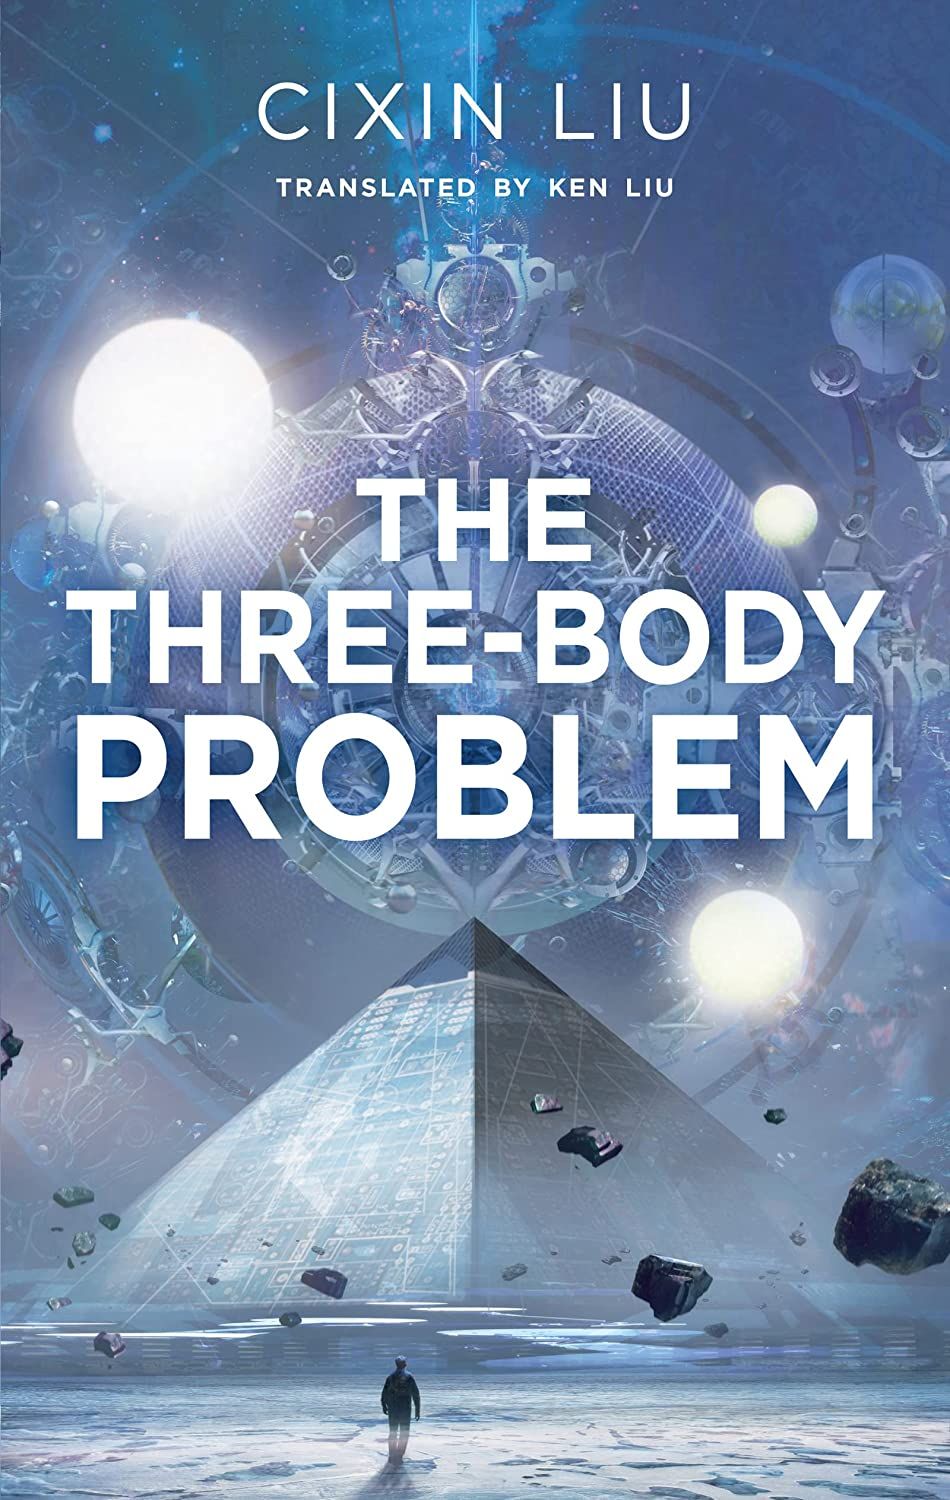 Bilibili-Produced The Three-Body Problem Animated Series Will Debut on  December 3rd, 2022 - PR Newswire APAC